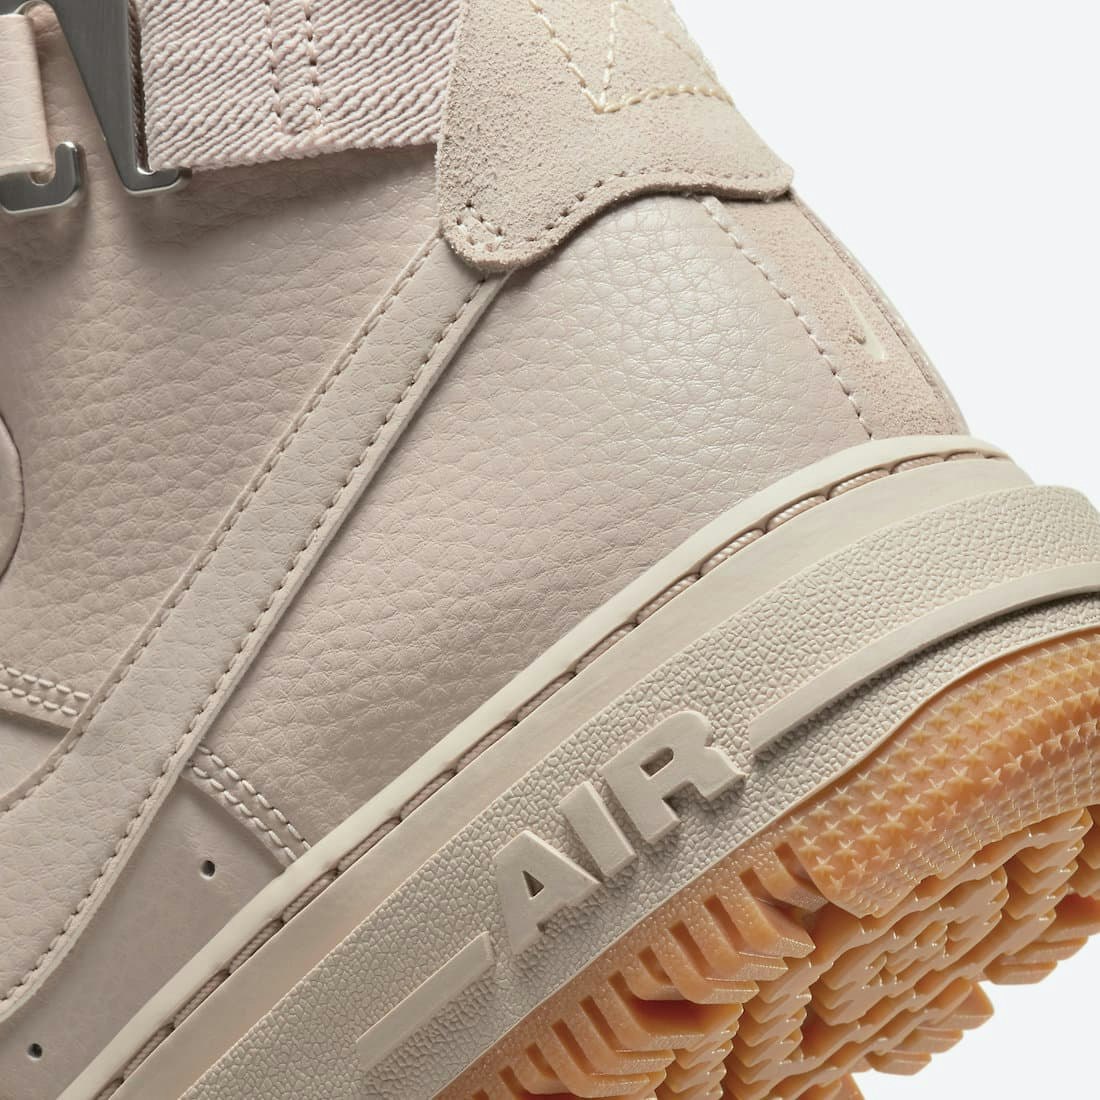 Nike Air Force 1 High Utility 2.0 "Fossil Stone"